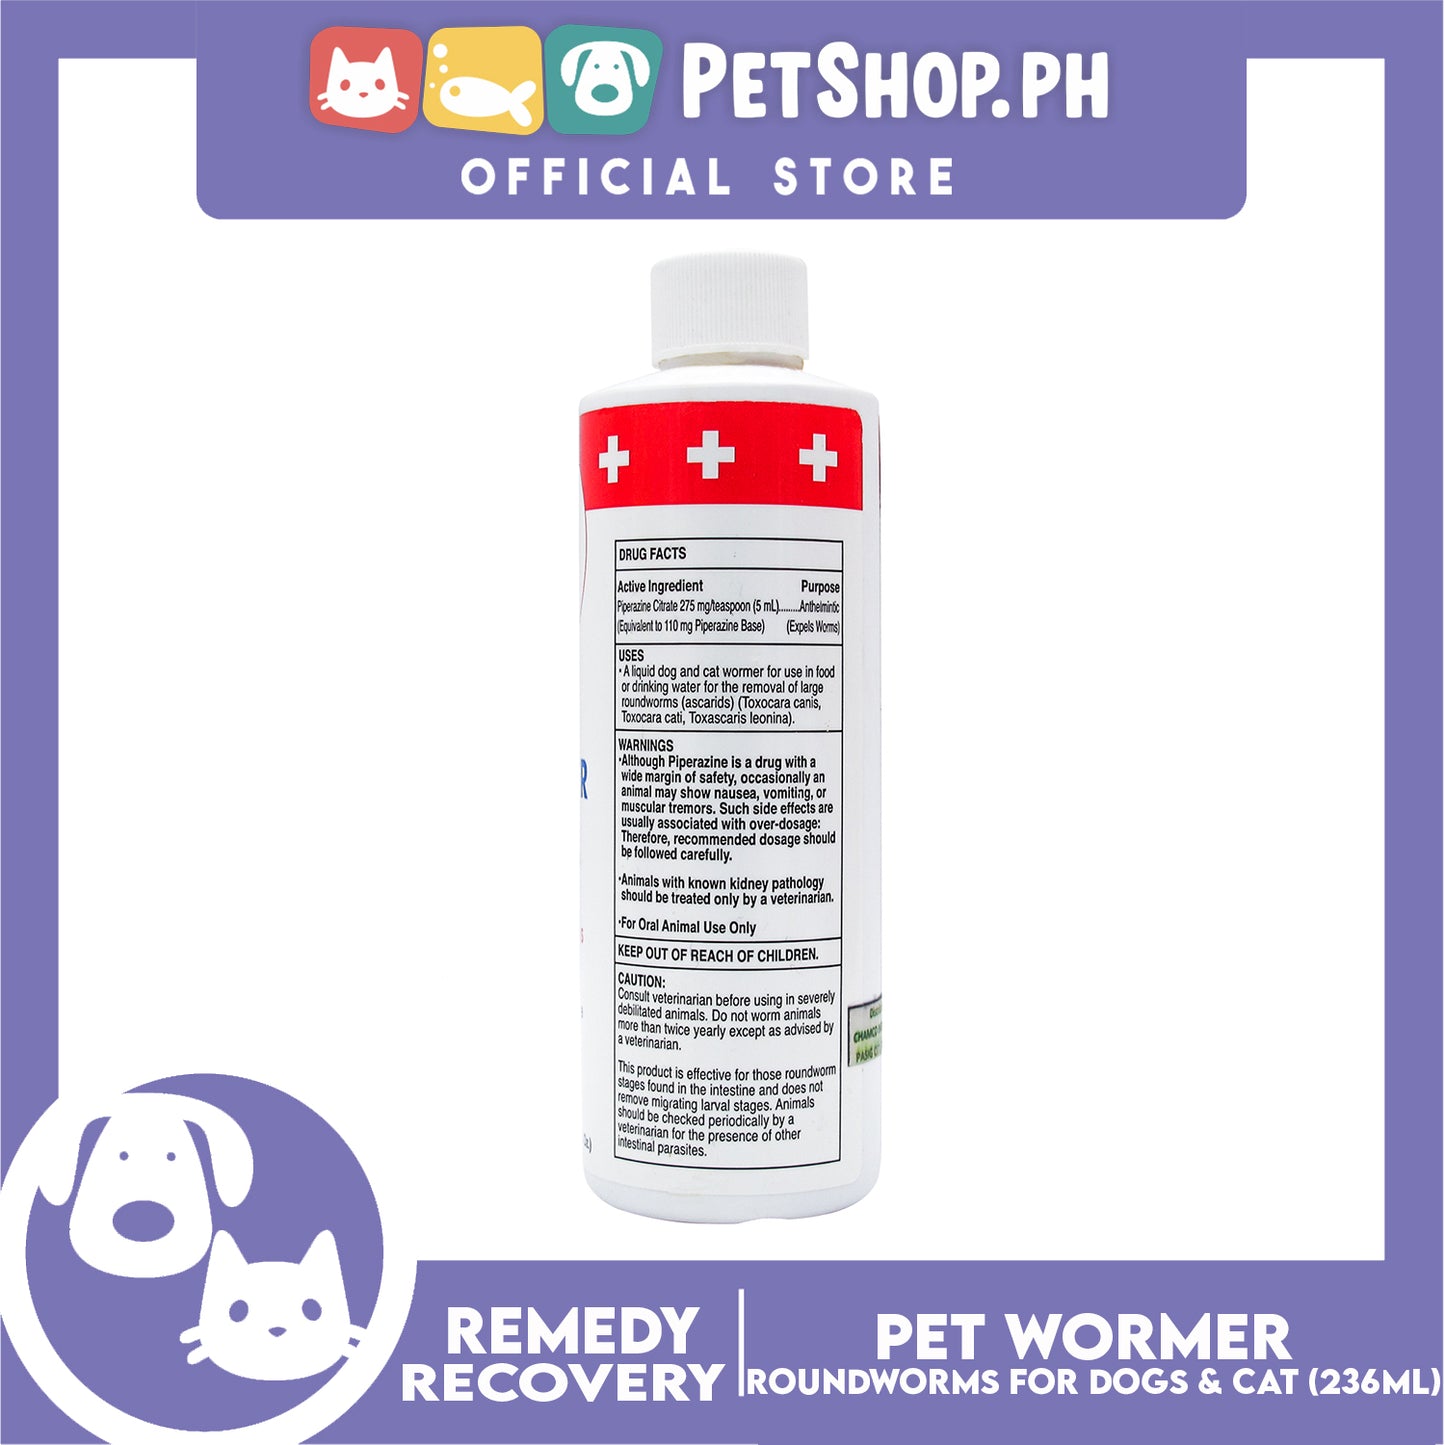 Remedy + Recovery Pet Wormer  236mL